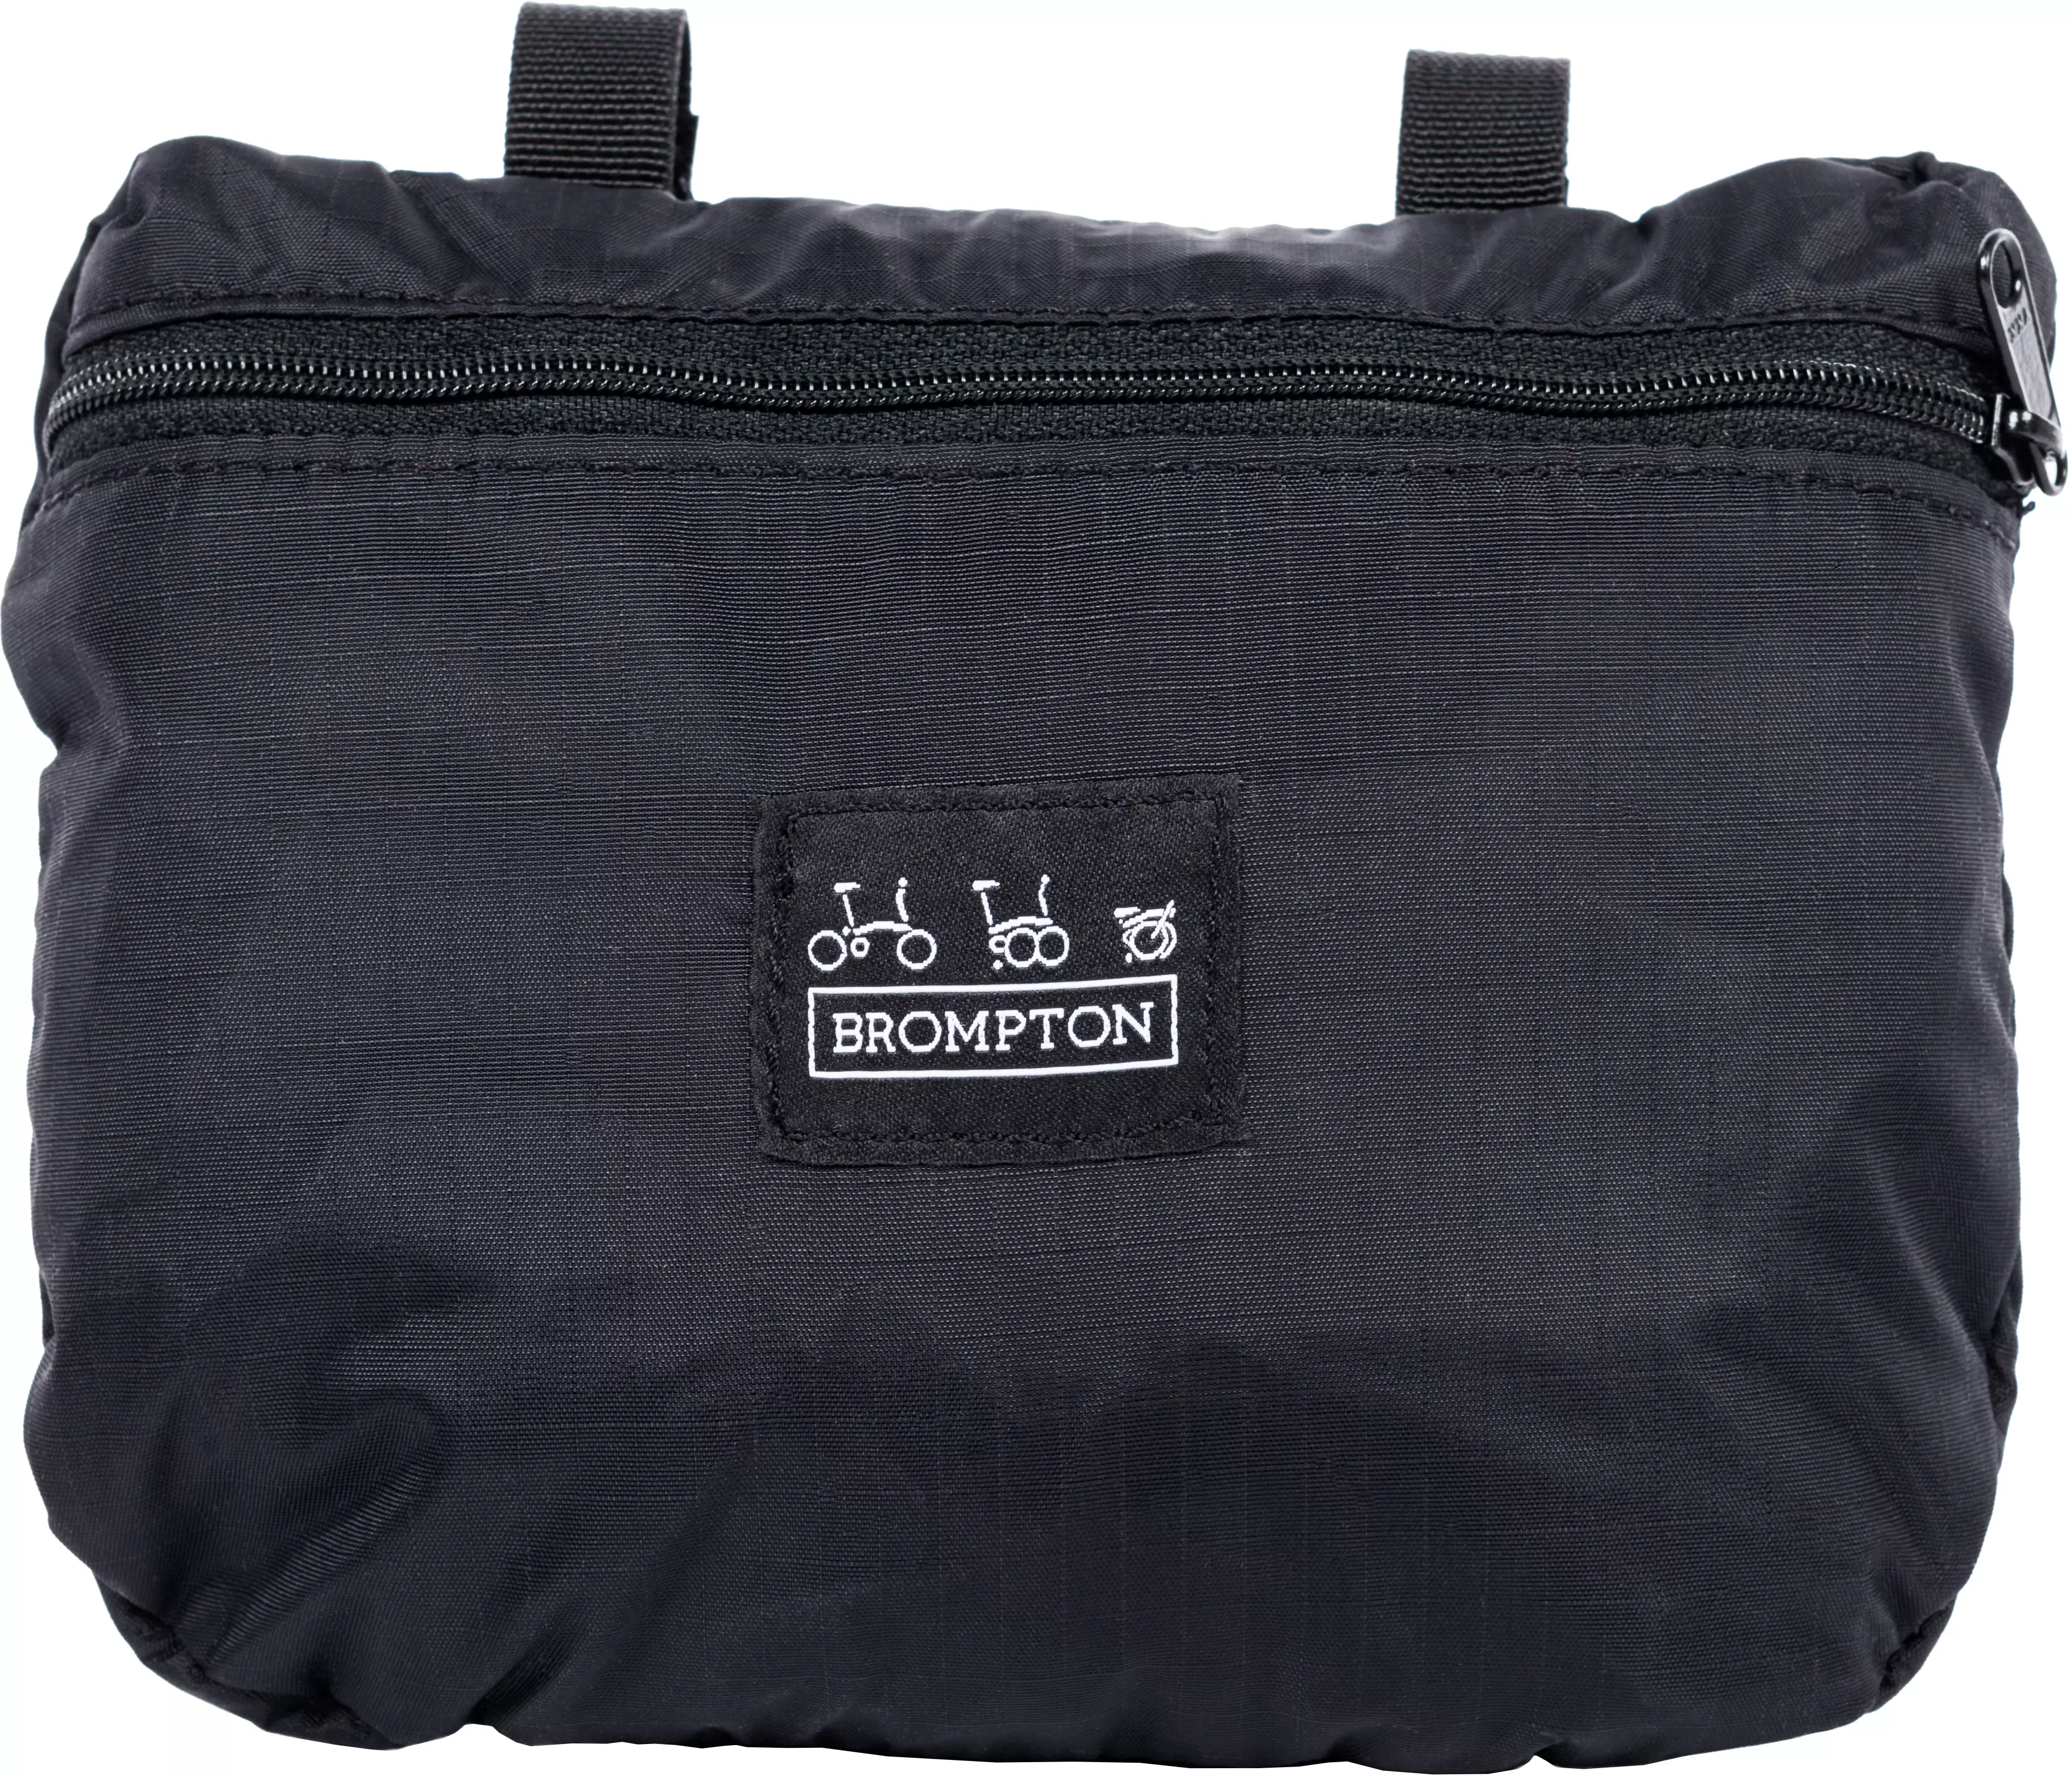 brompton bike cover with integrated pouch